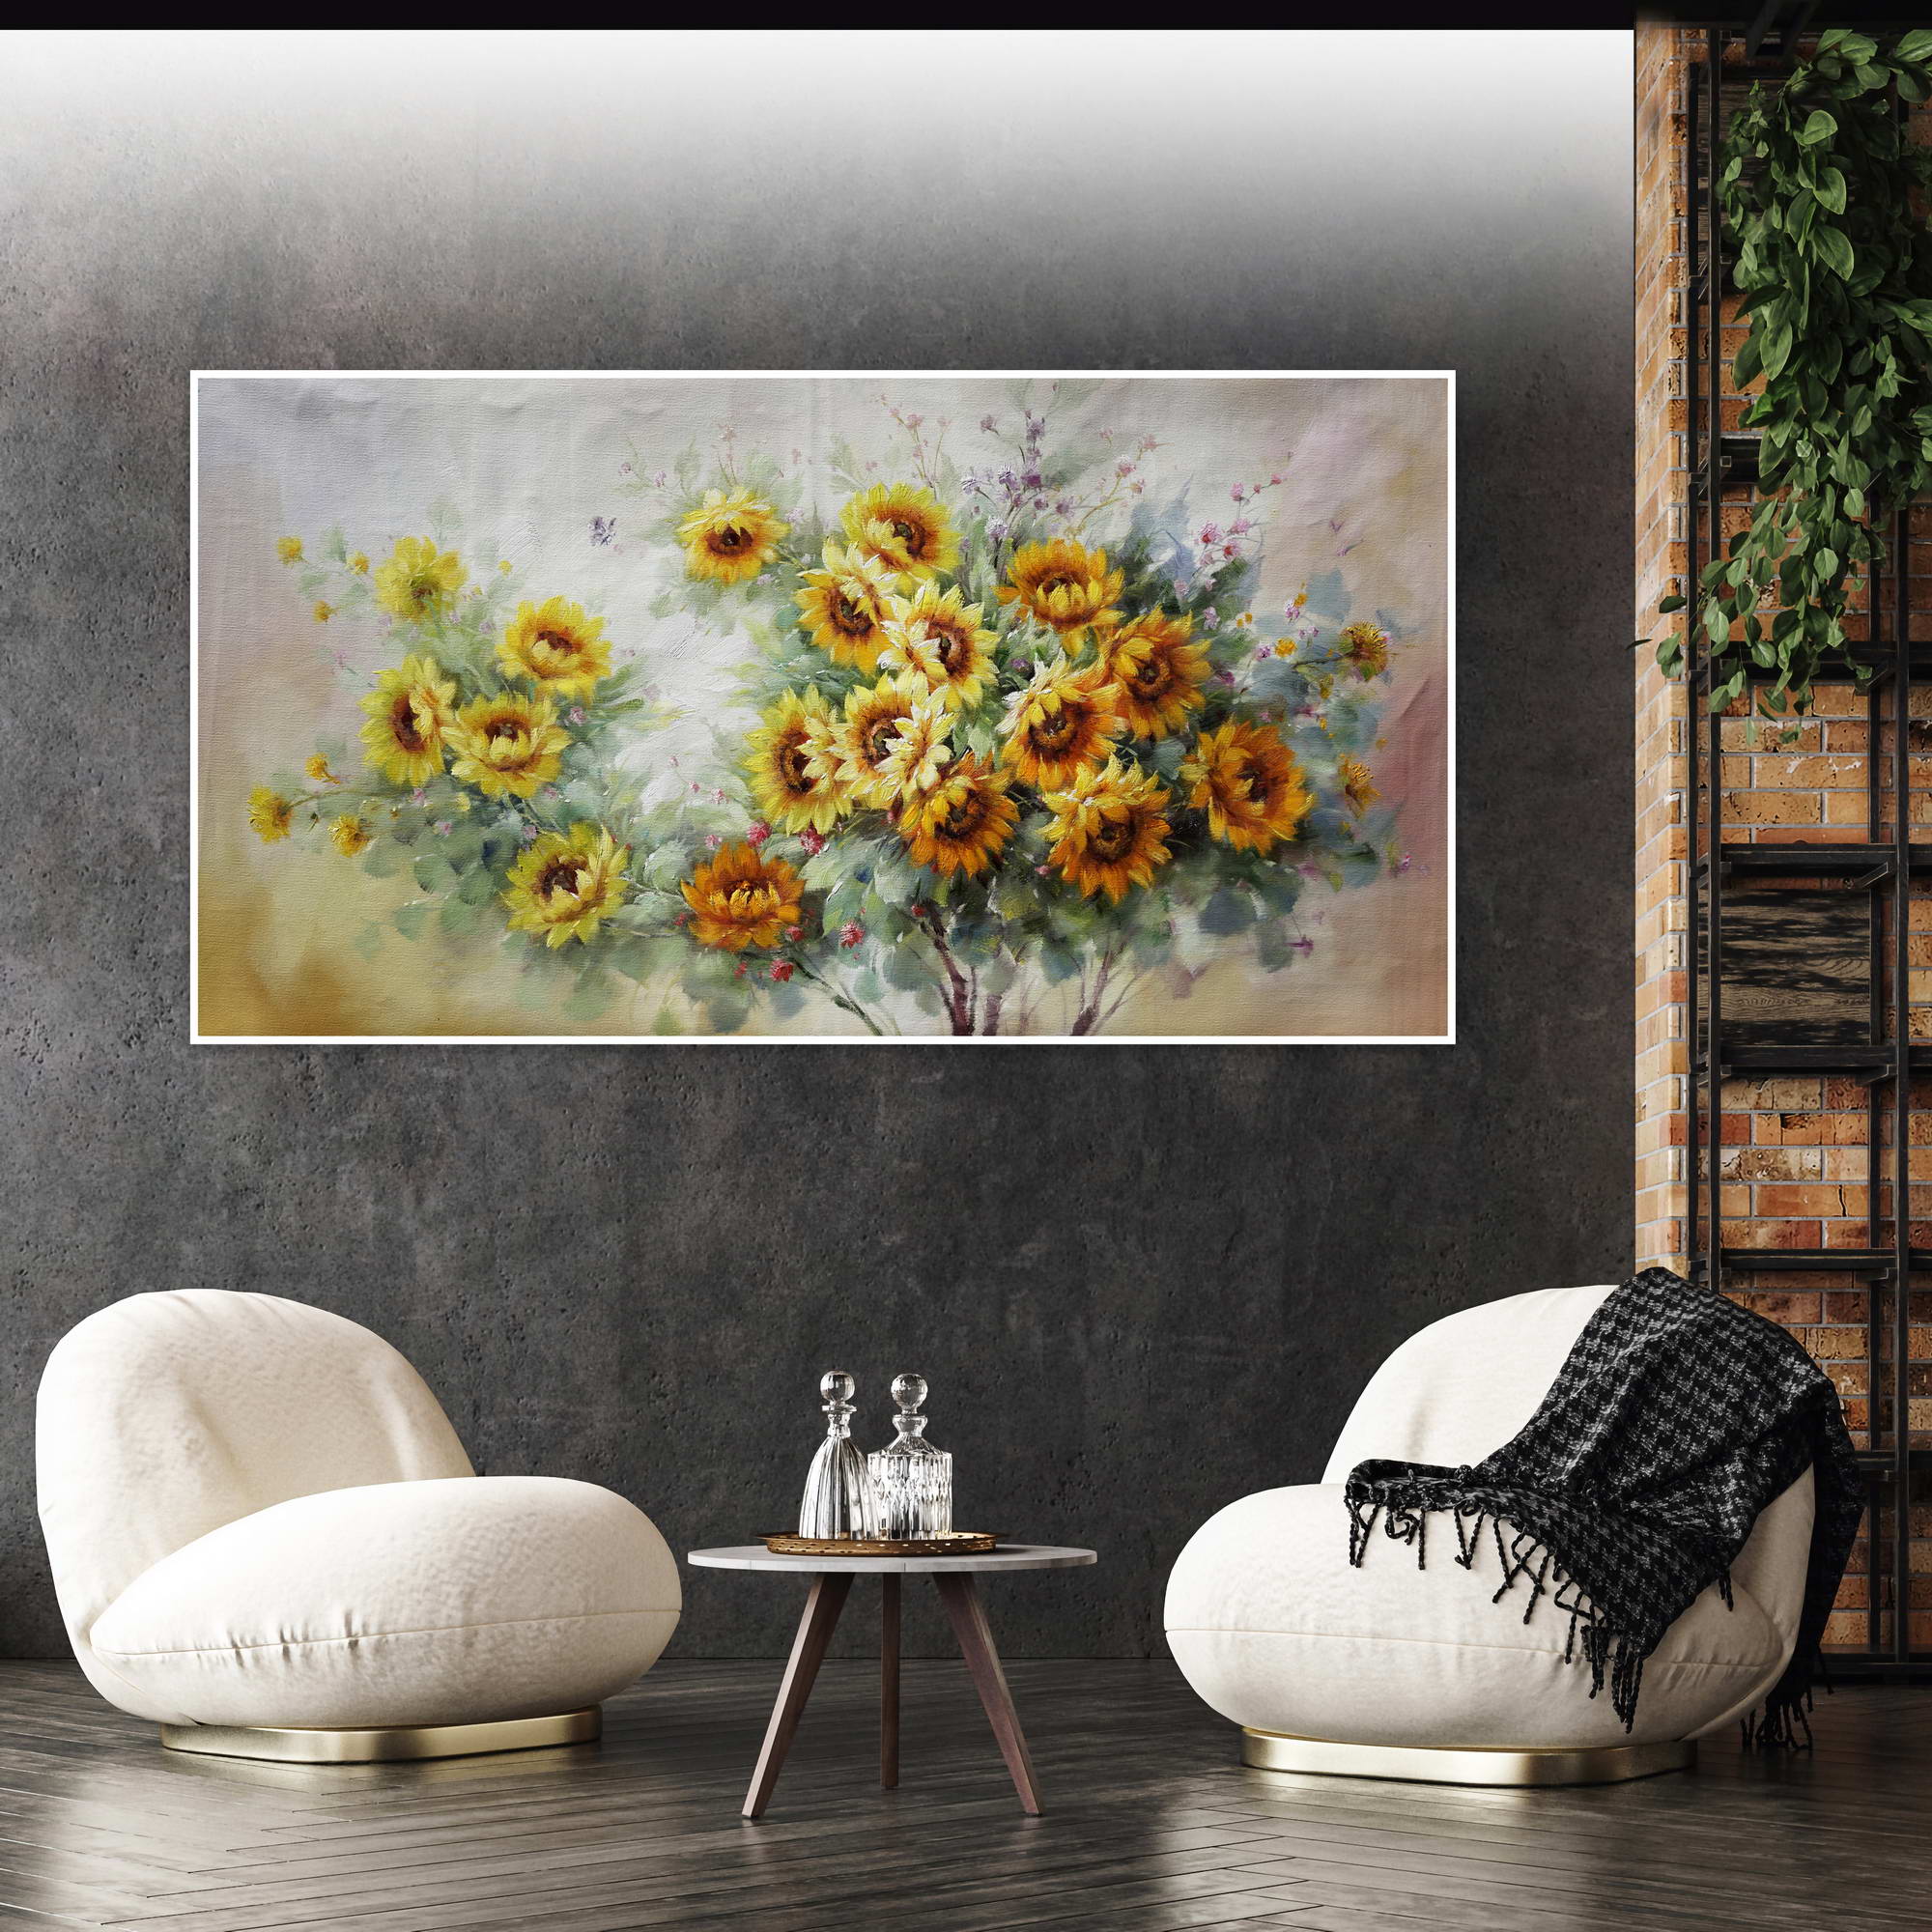 Hand painted Still Life with Sunflowers 75x150cm